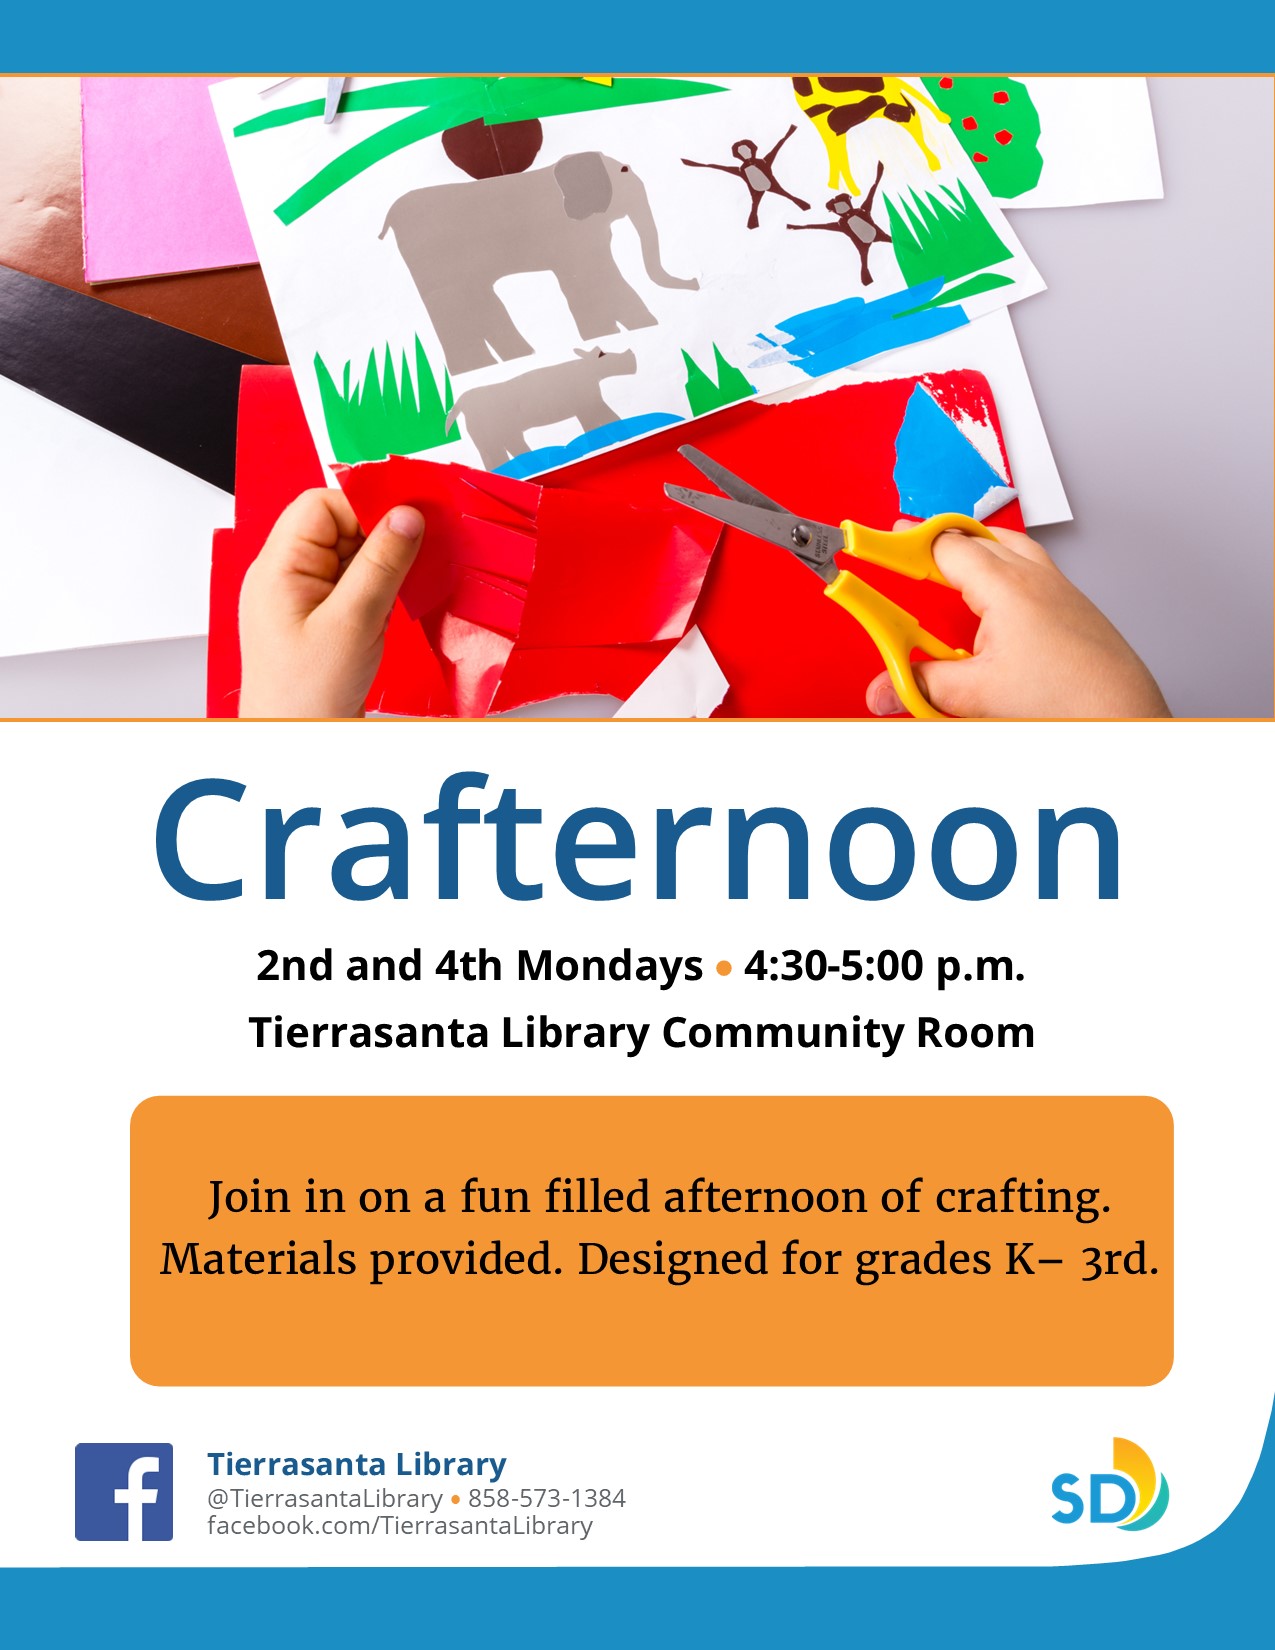 Afternoon of crafts for K-3rd grade